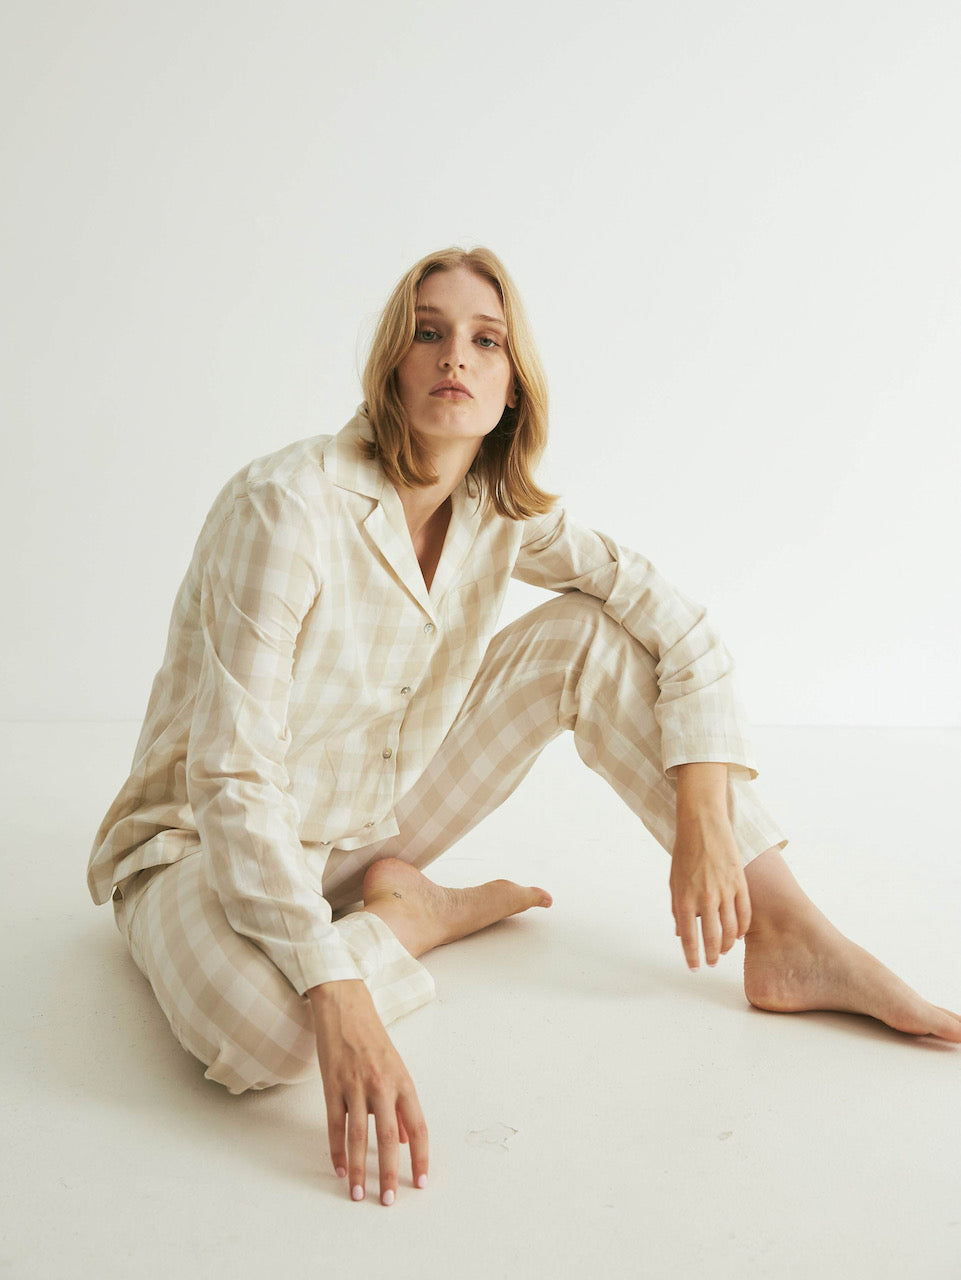 A woman sitting on the floor in a Oatmeal Gingham Classic Set by general sleep.